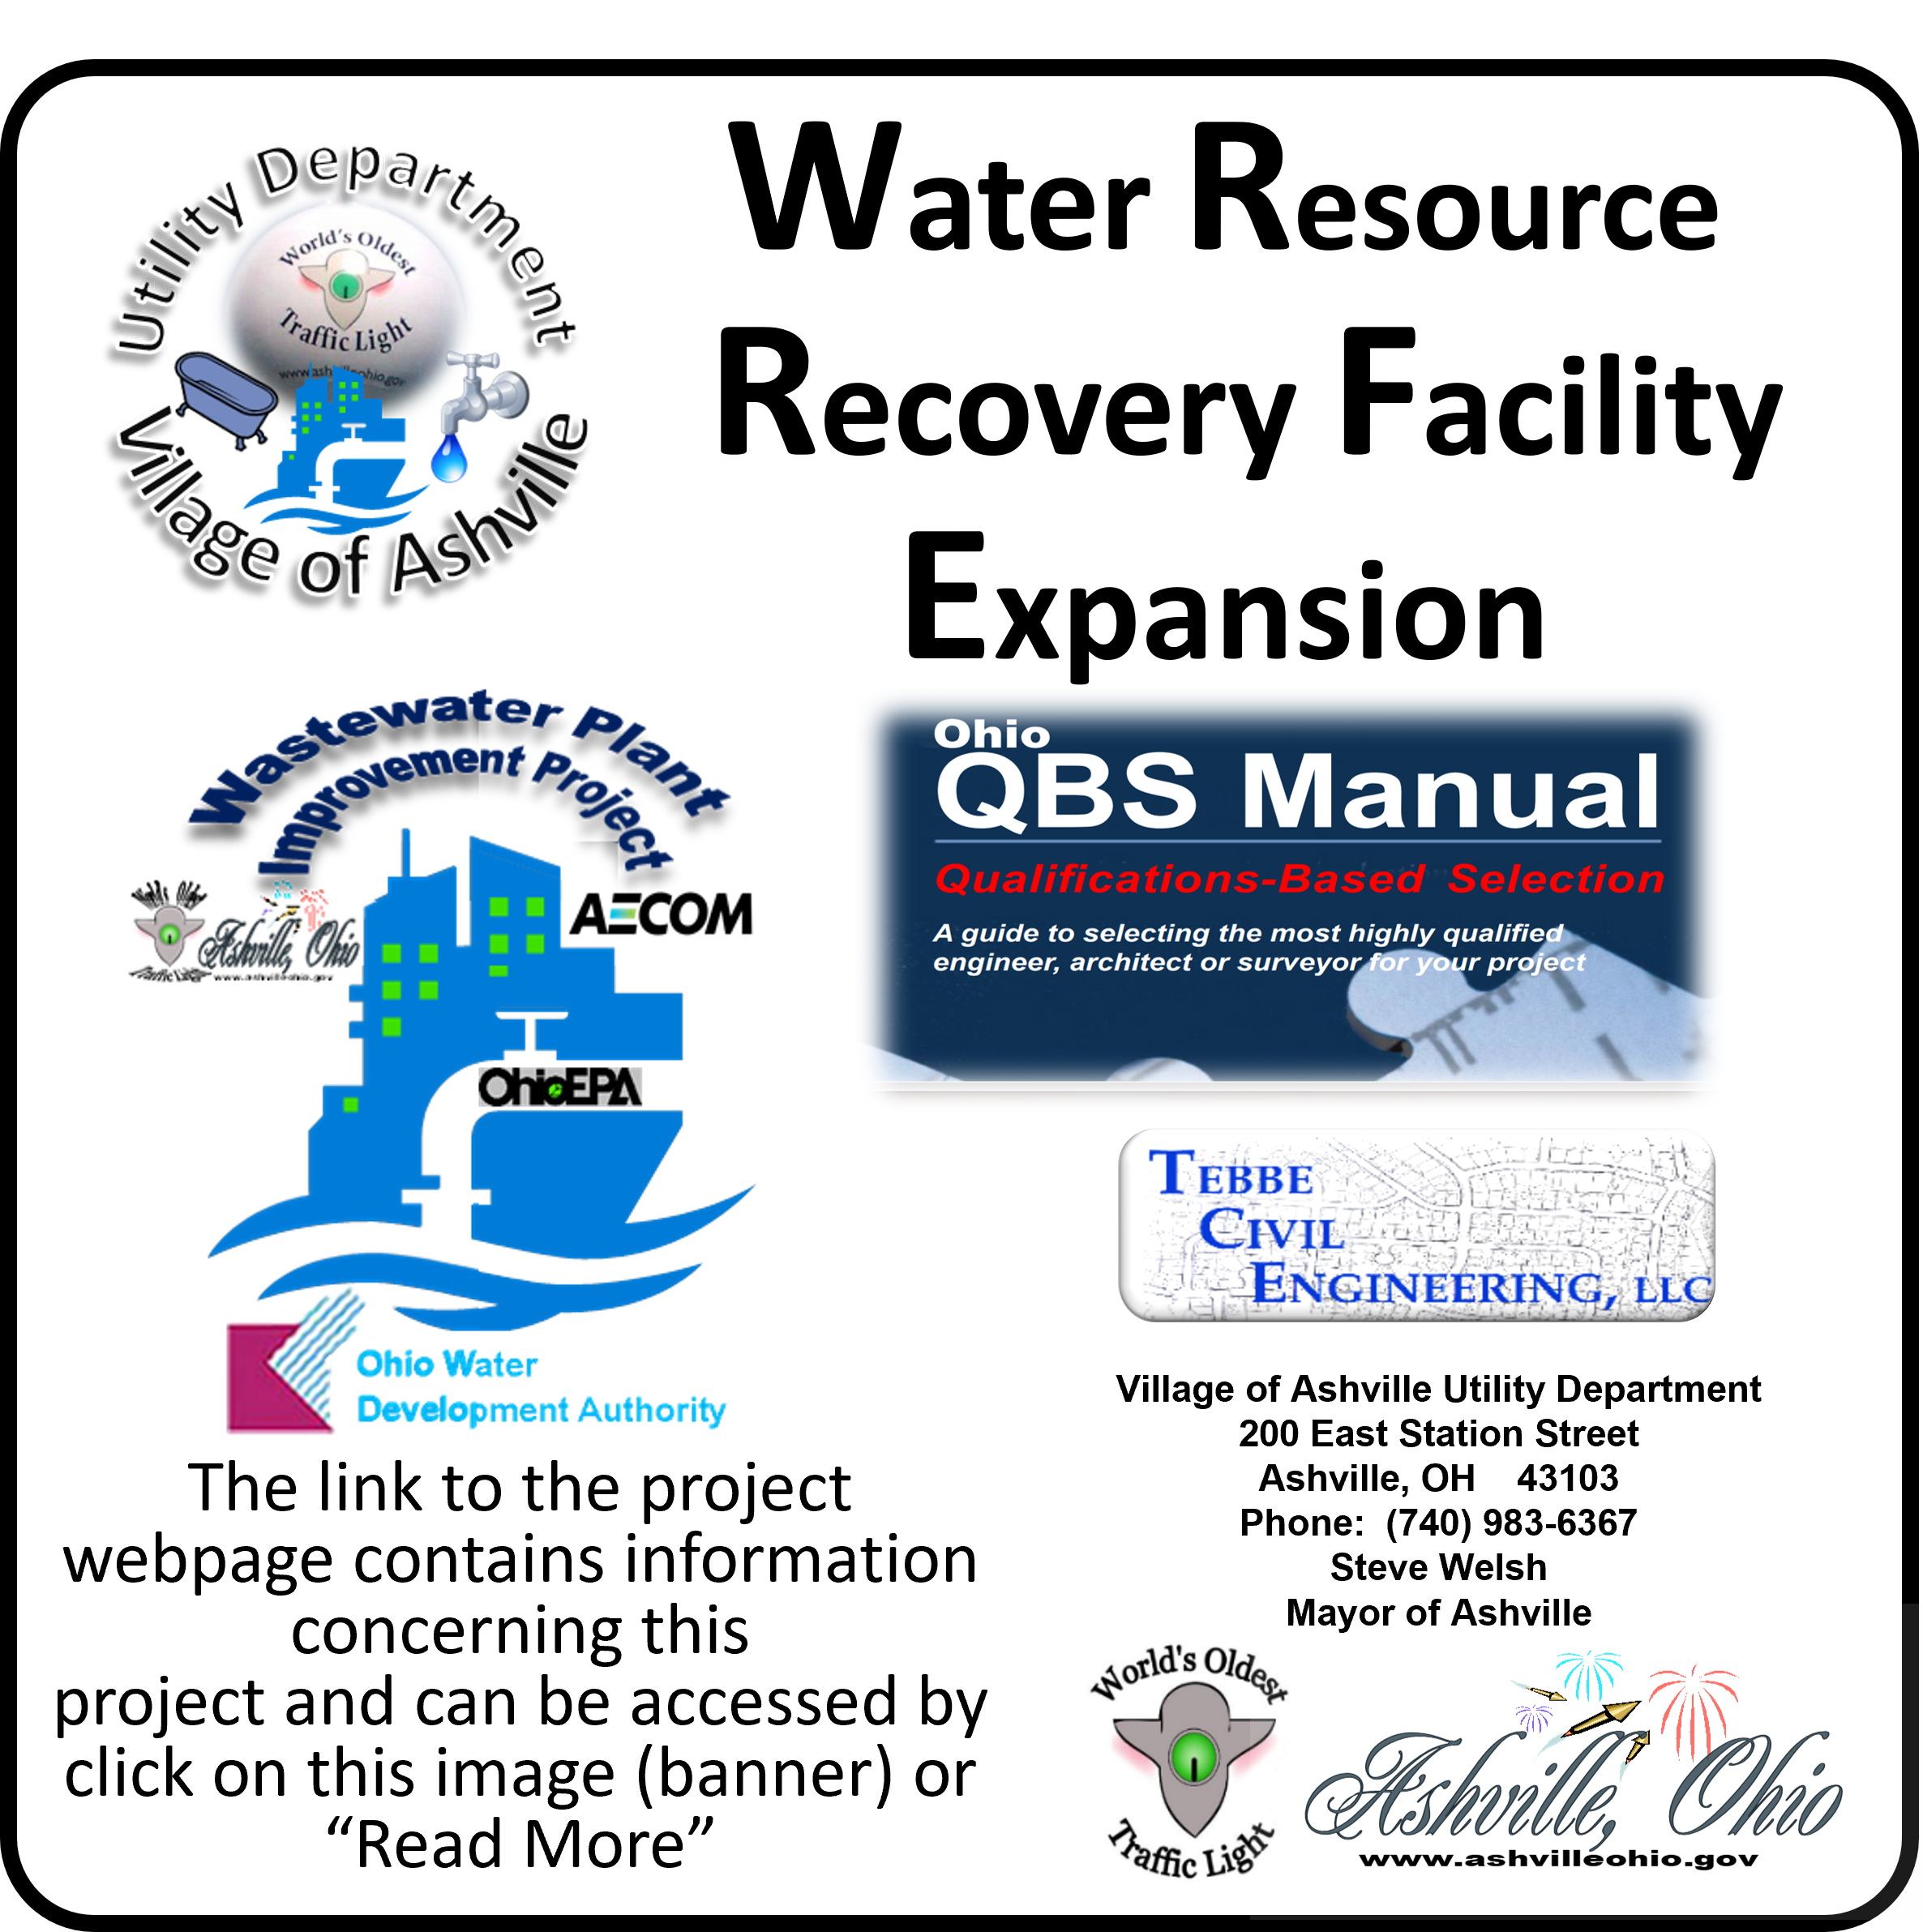 Water Resource Recovery Facility Expansion